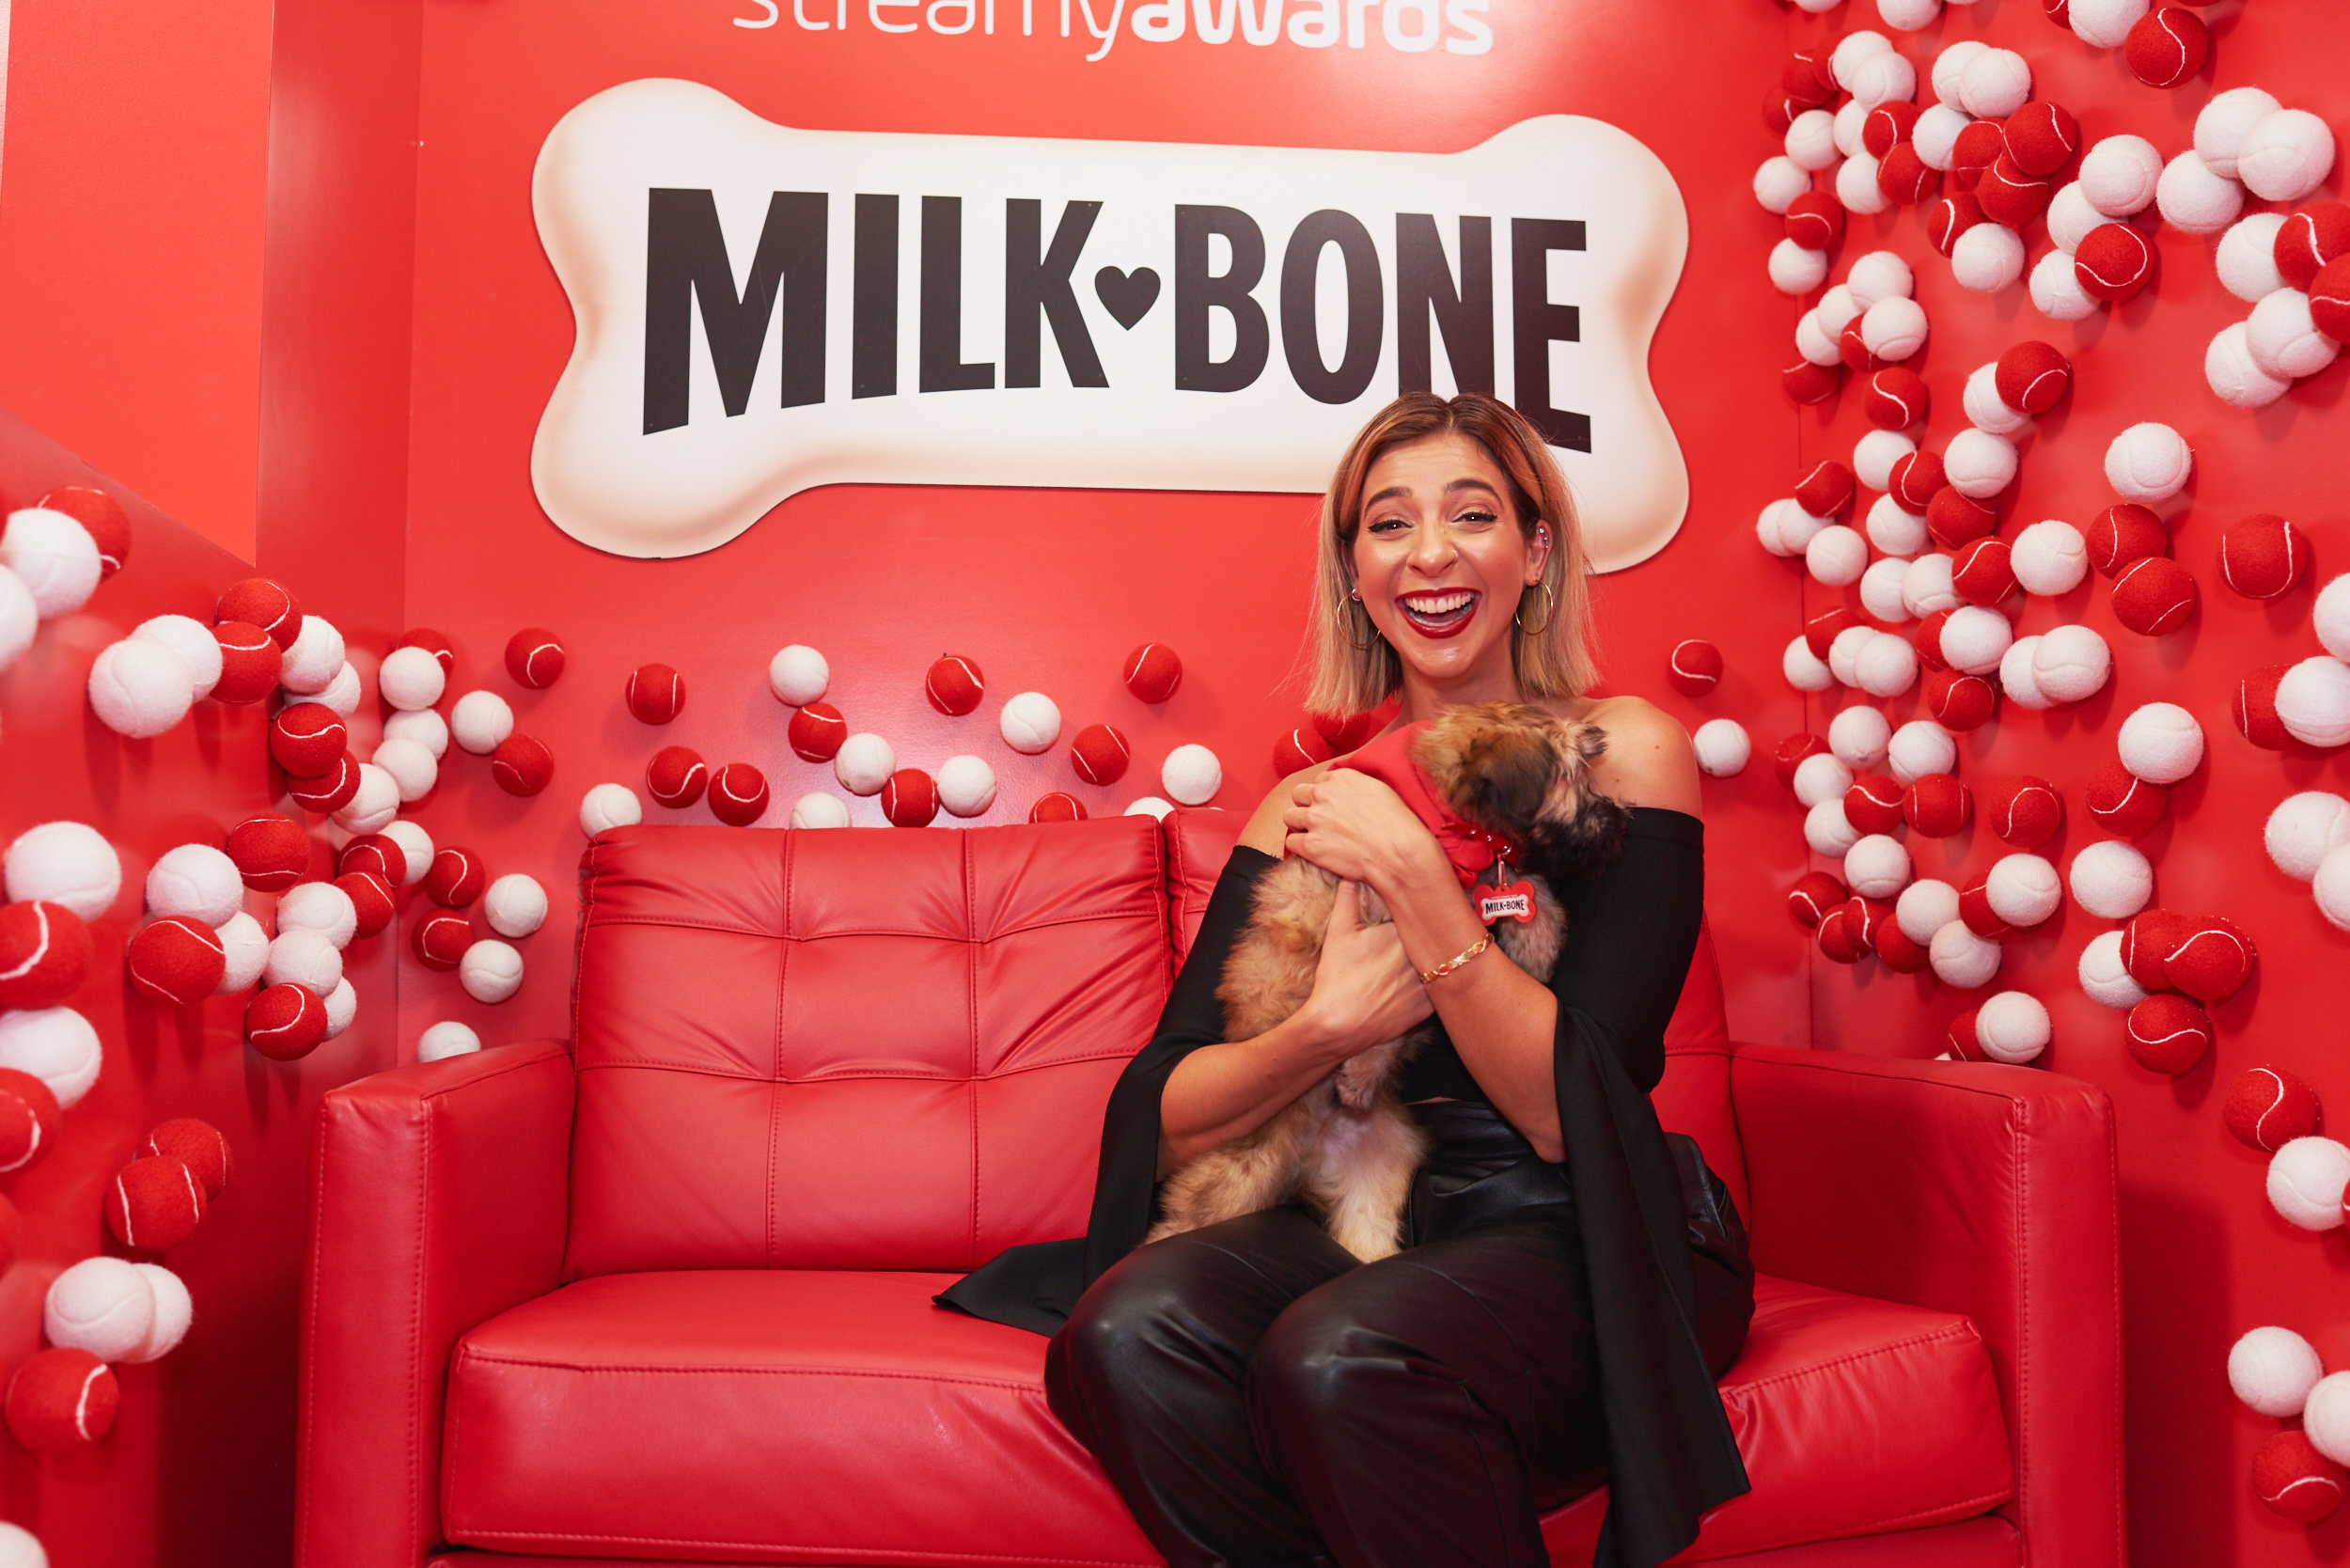 Gabbie Hanna Streamy Awards, Red carpet fashion, Exciting event, Media recognition, 2500x1670 HD Desktop